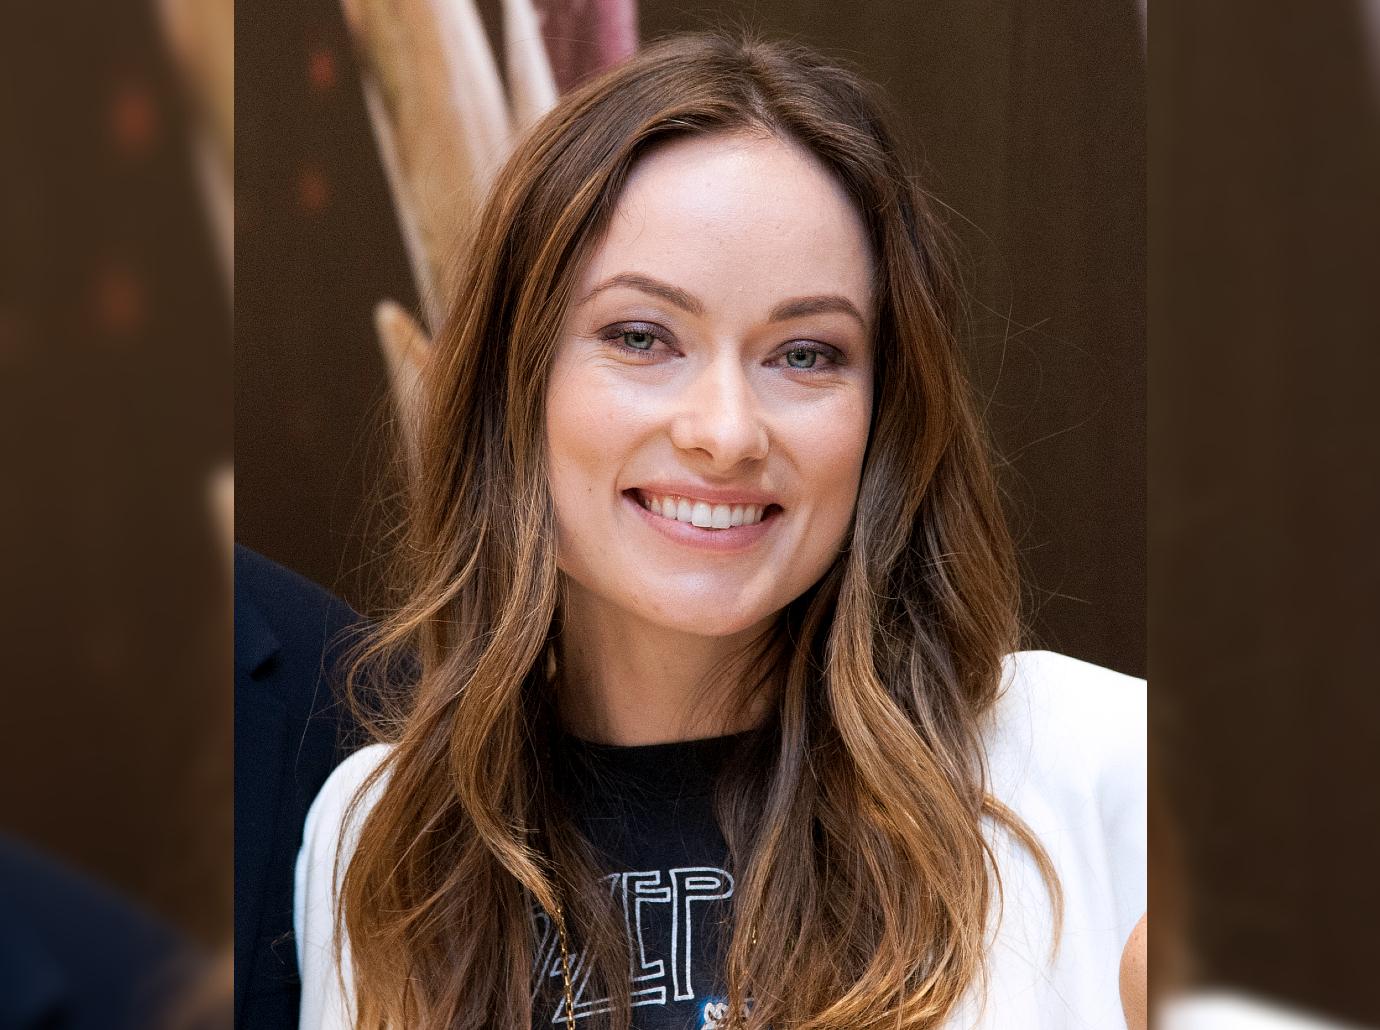 Shop Celeb-Worthy Watches From Angelina Jolie, Olivia Wilde & More